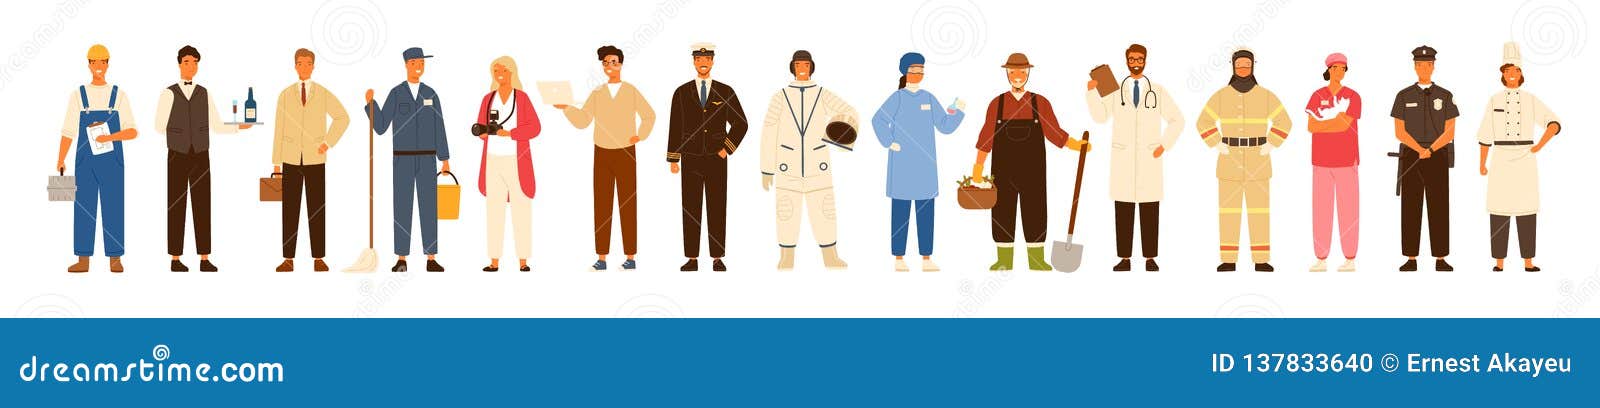 collection of men and women of various occupations or profession wearing professional uniform - construction worker